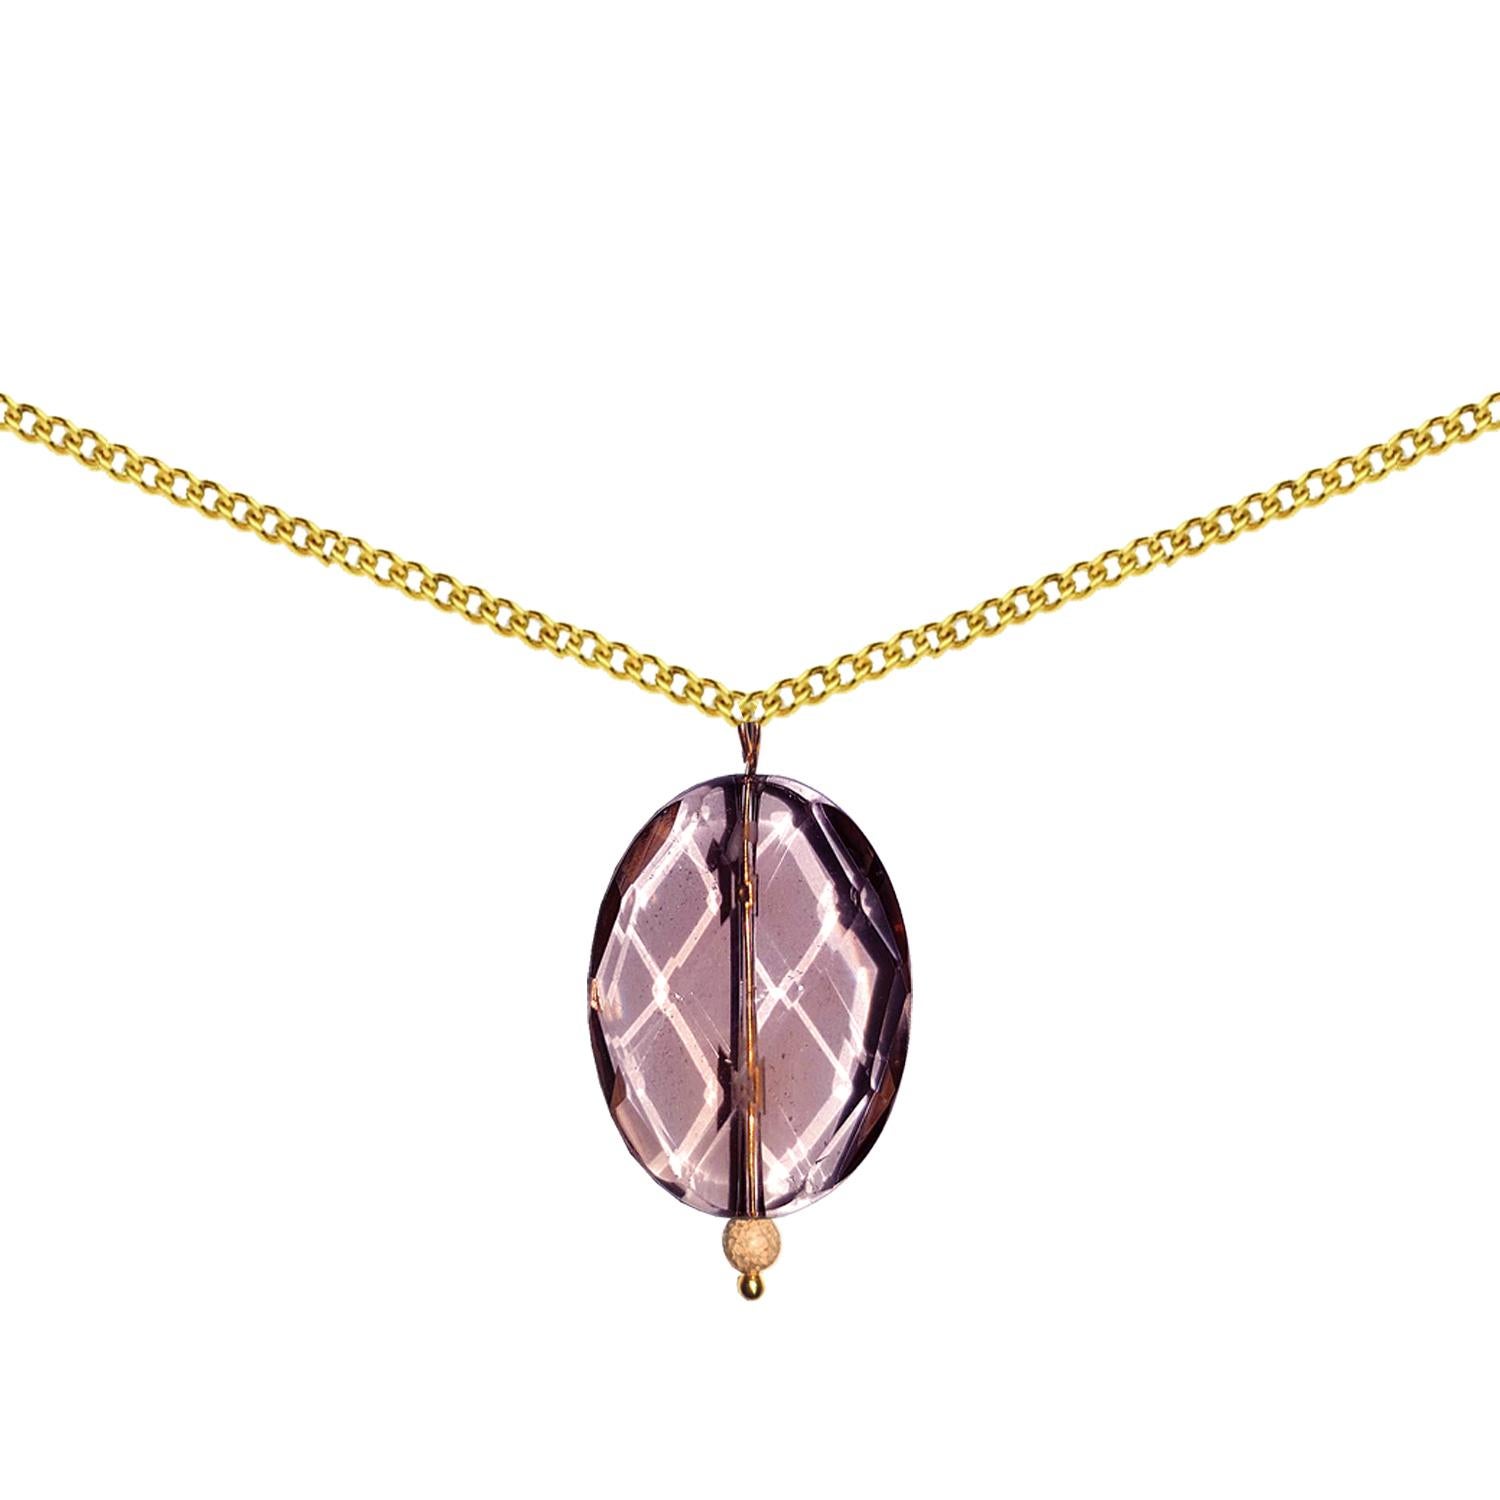 nlanla's message to you is to embrace change. Purple Hues and Orange Sunsets are a complex combination of the flow and process of change. Crafted from Smoky Quartz and featuring a golddust cut 9ct gold bead. This 9ct gold necklace was designed to